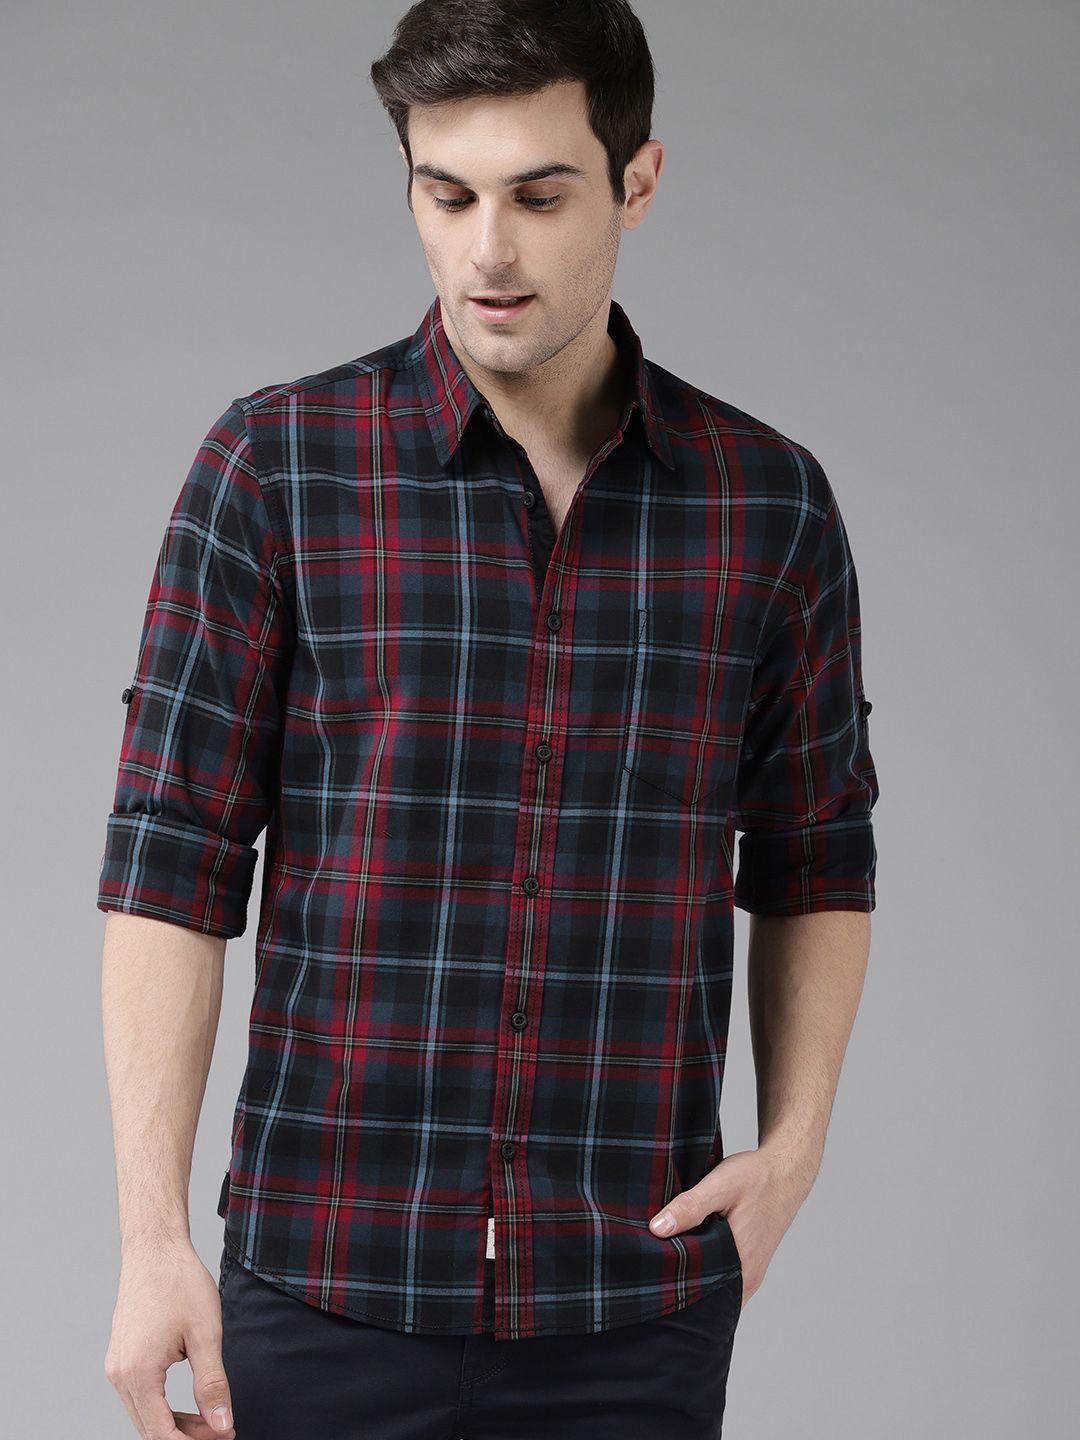 the roadster lifestyle co men maroon & navy blue regular fit checked sustainable casual shirt